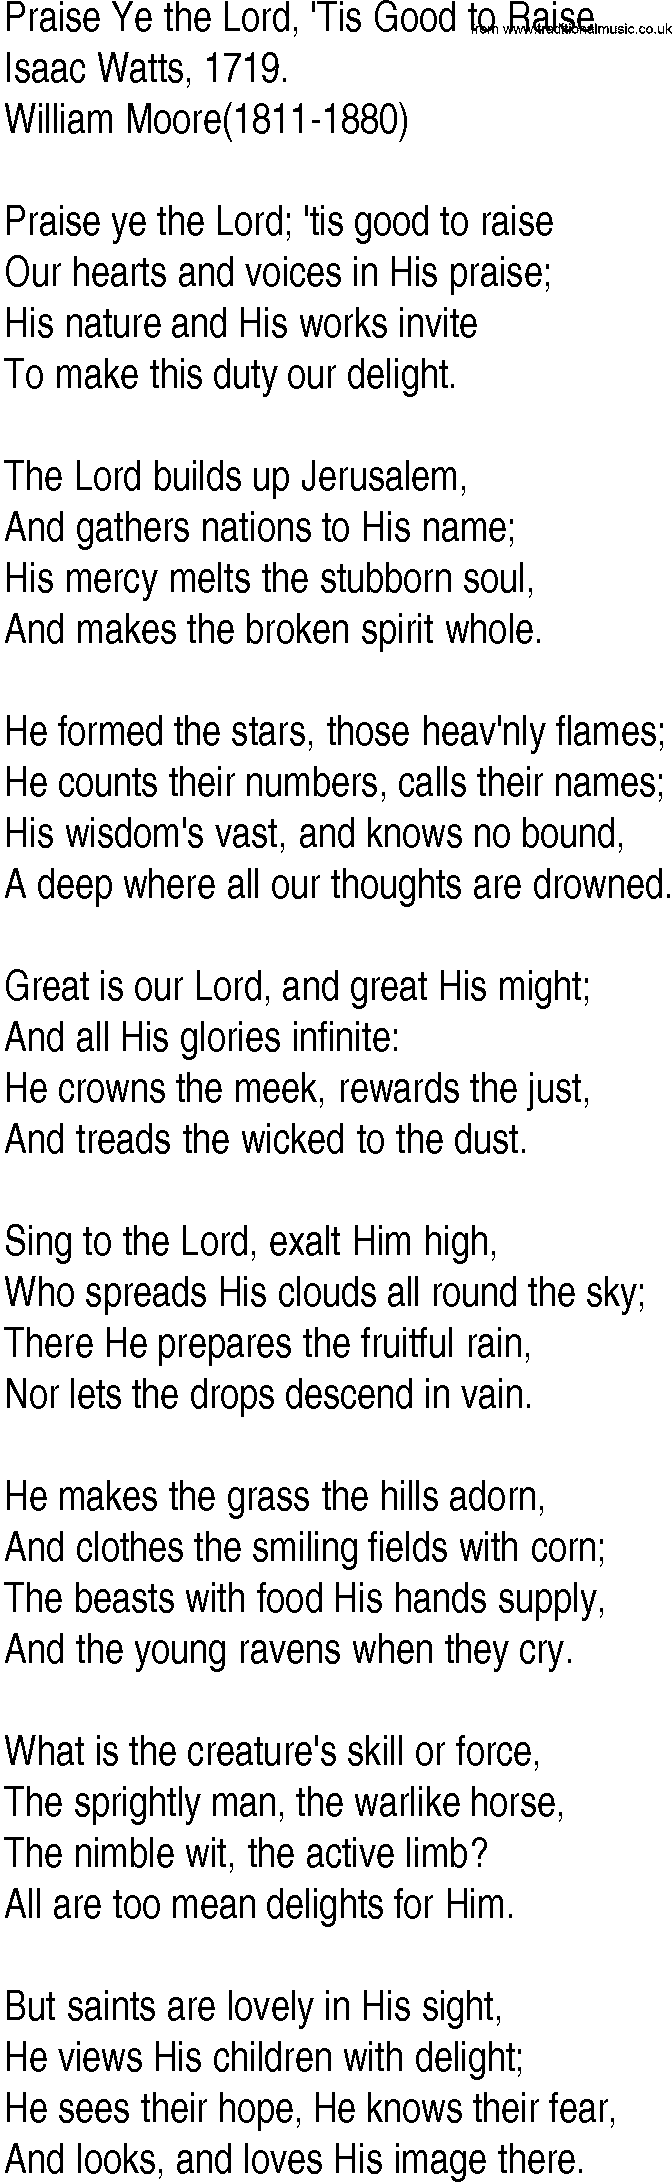 Hymn and Gospel Song: Praise Ye the Lord, 'Tis Good to Raise by Isaac Watts lyrics